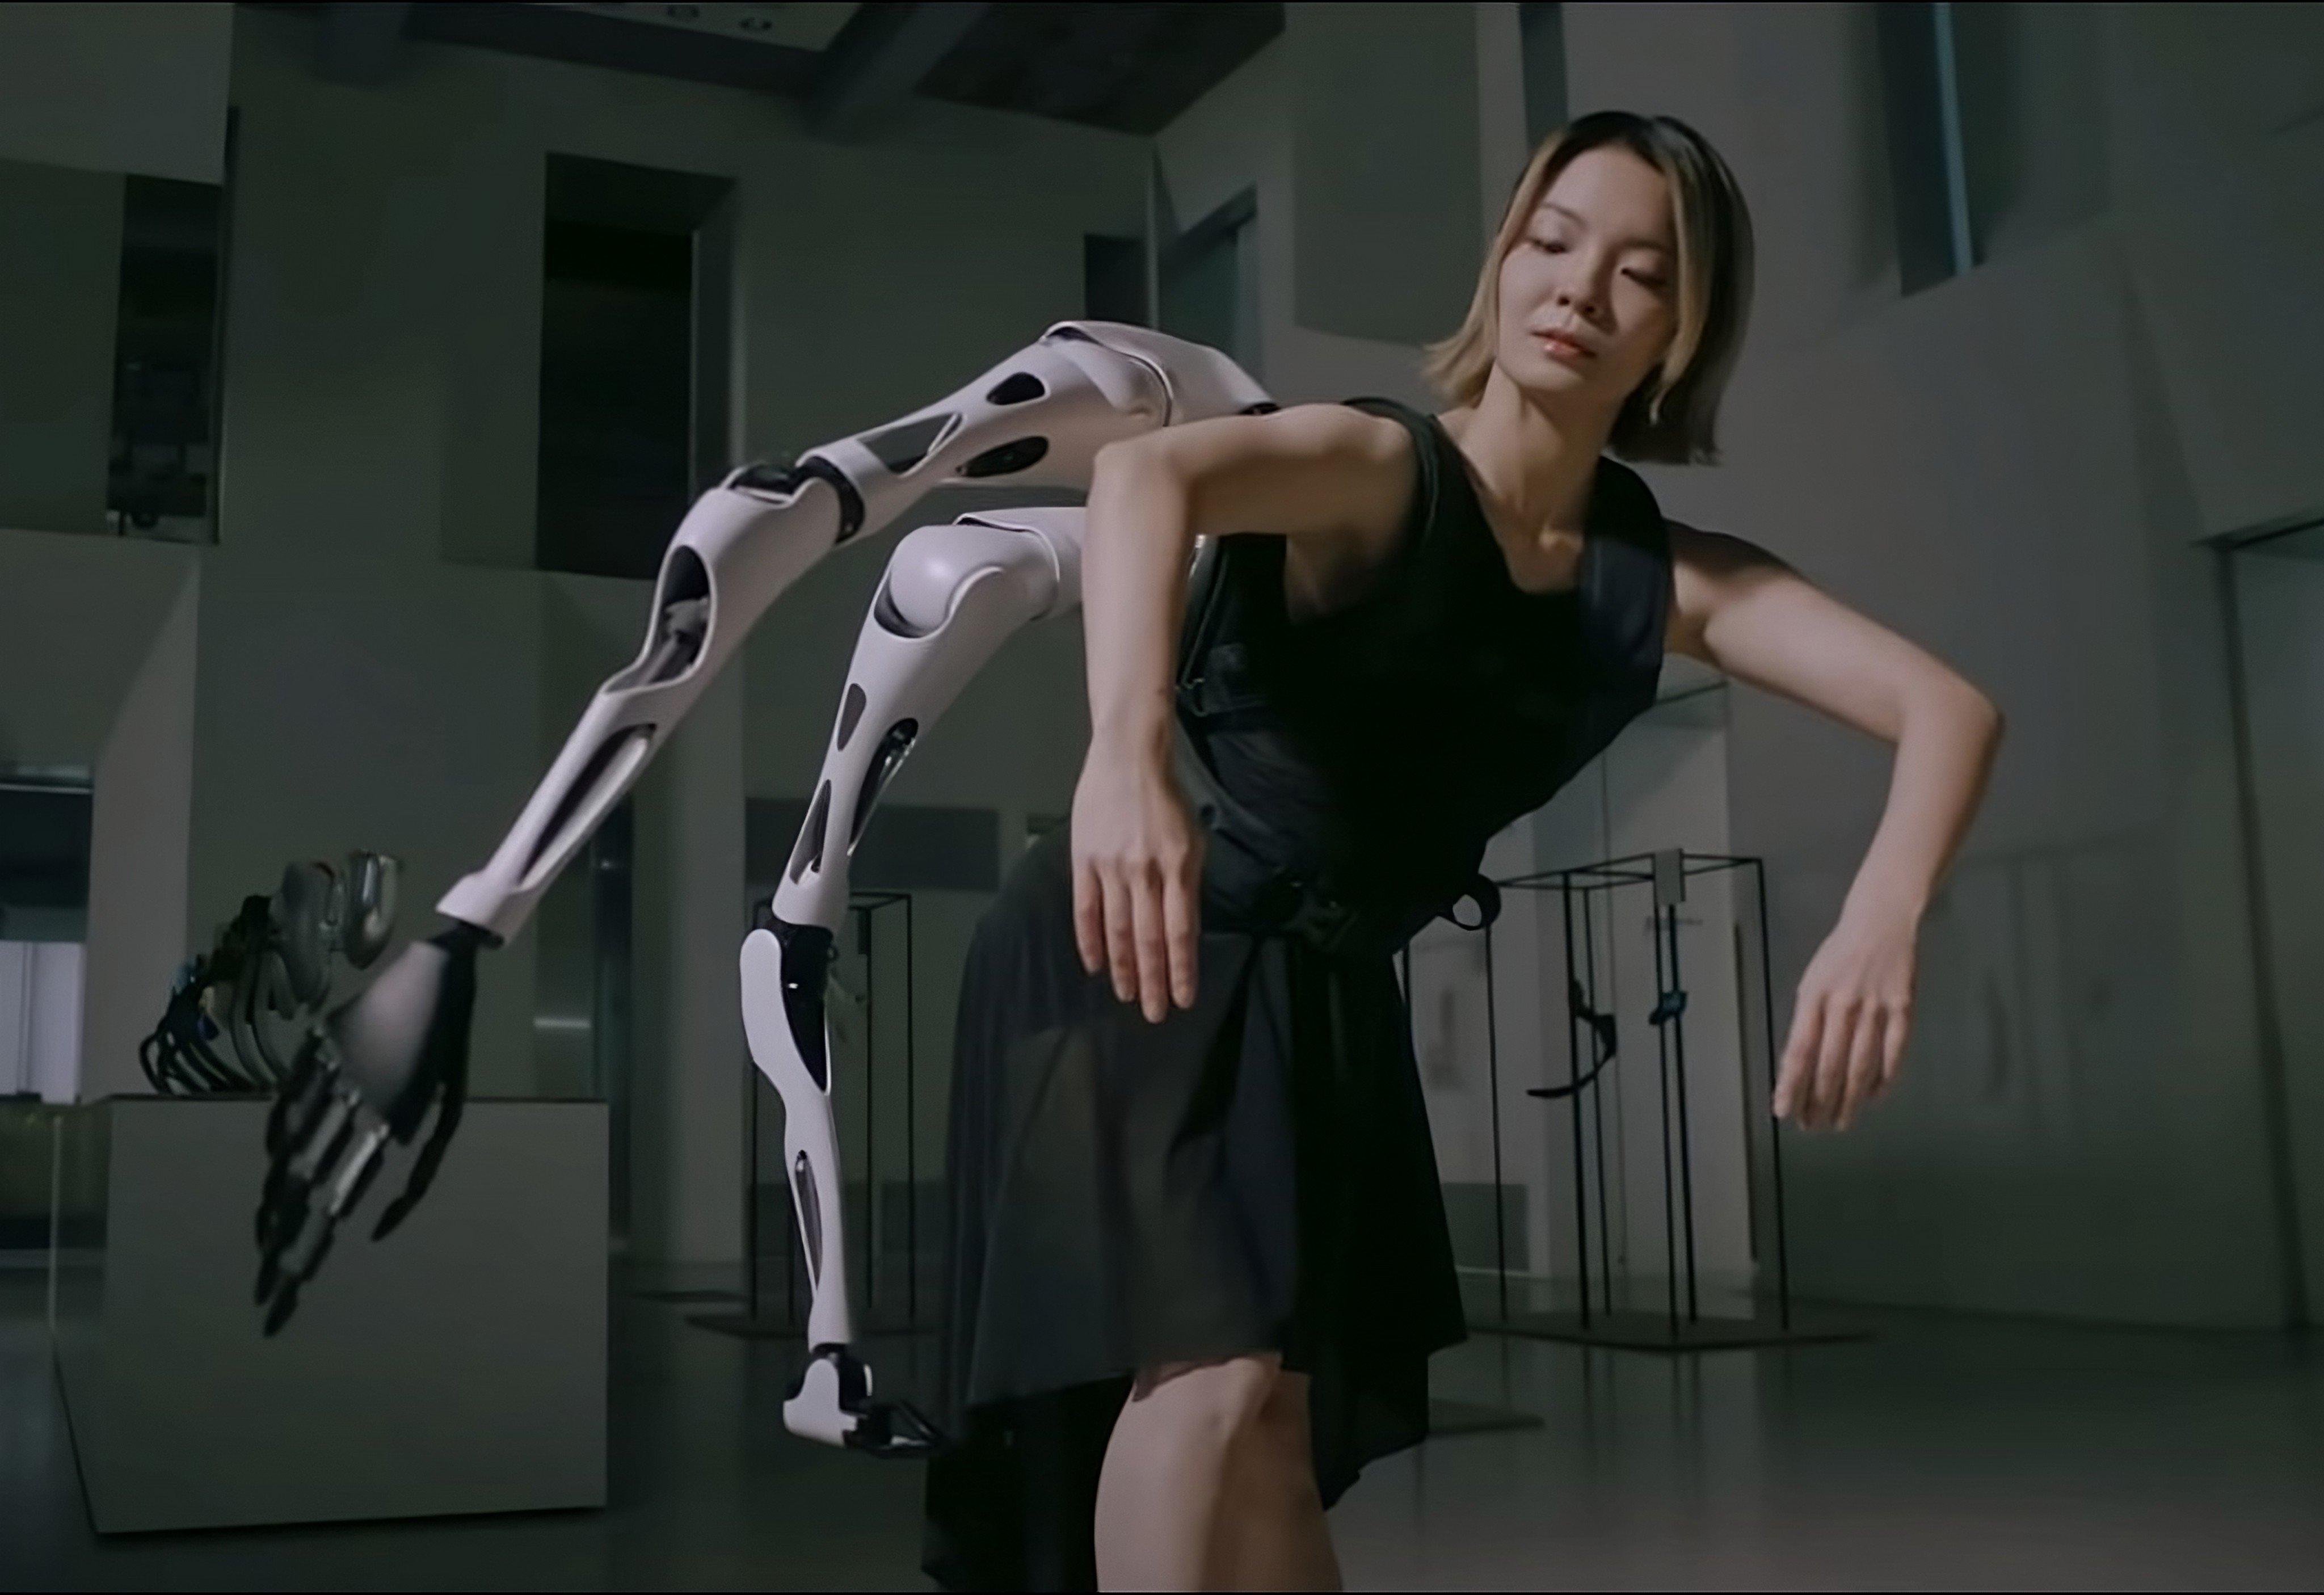 A ballet dancer wears the “Jizai Arms” in this still from a promotional video of a performance showing the robotic arms protruding from the dancers’ backs and torsos. Photo: YouTube/@inamijizaibodyproject585